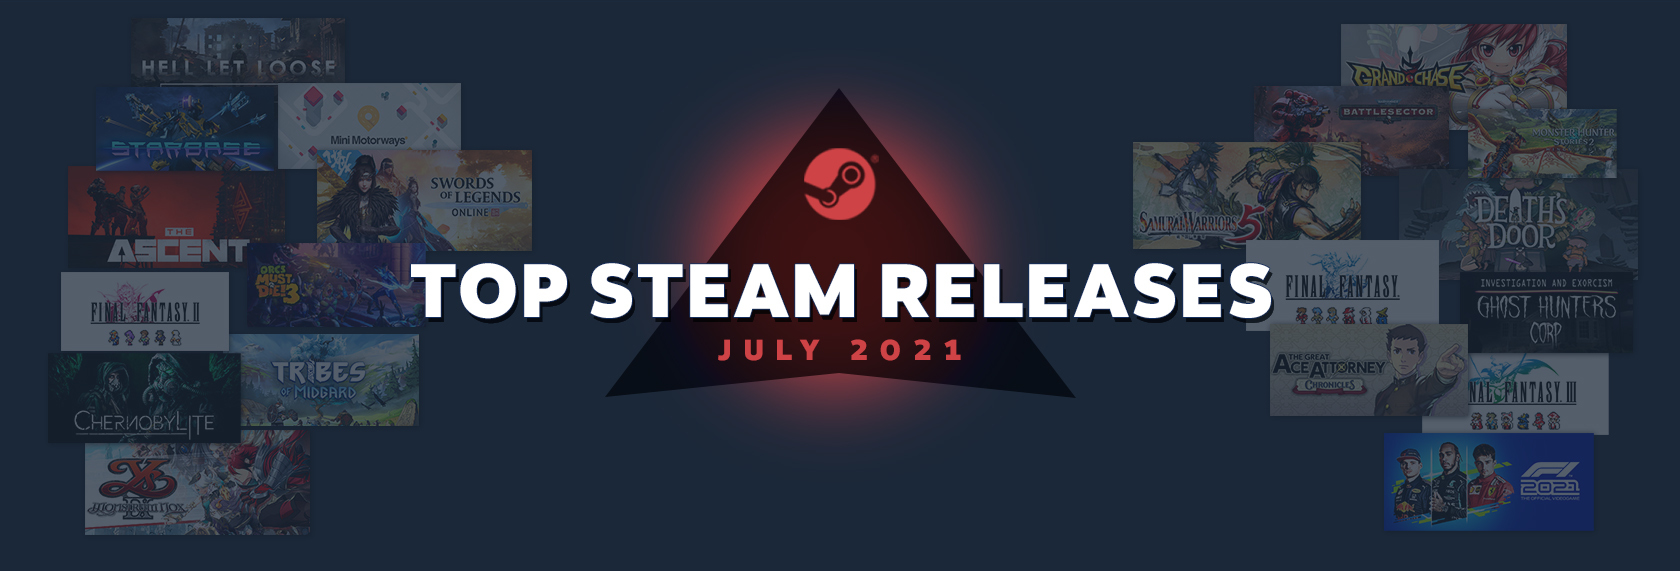 Steam “Best of 2018” Lists; A Look Back At 2018 